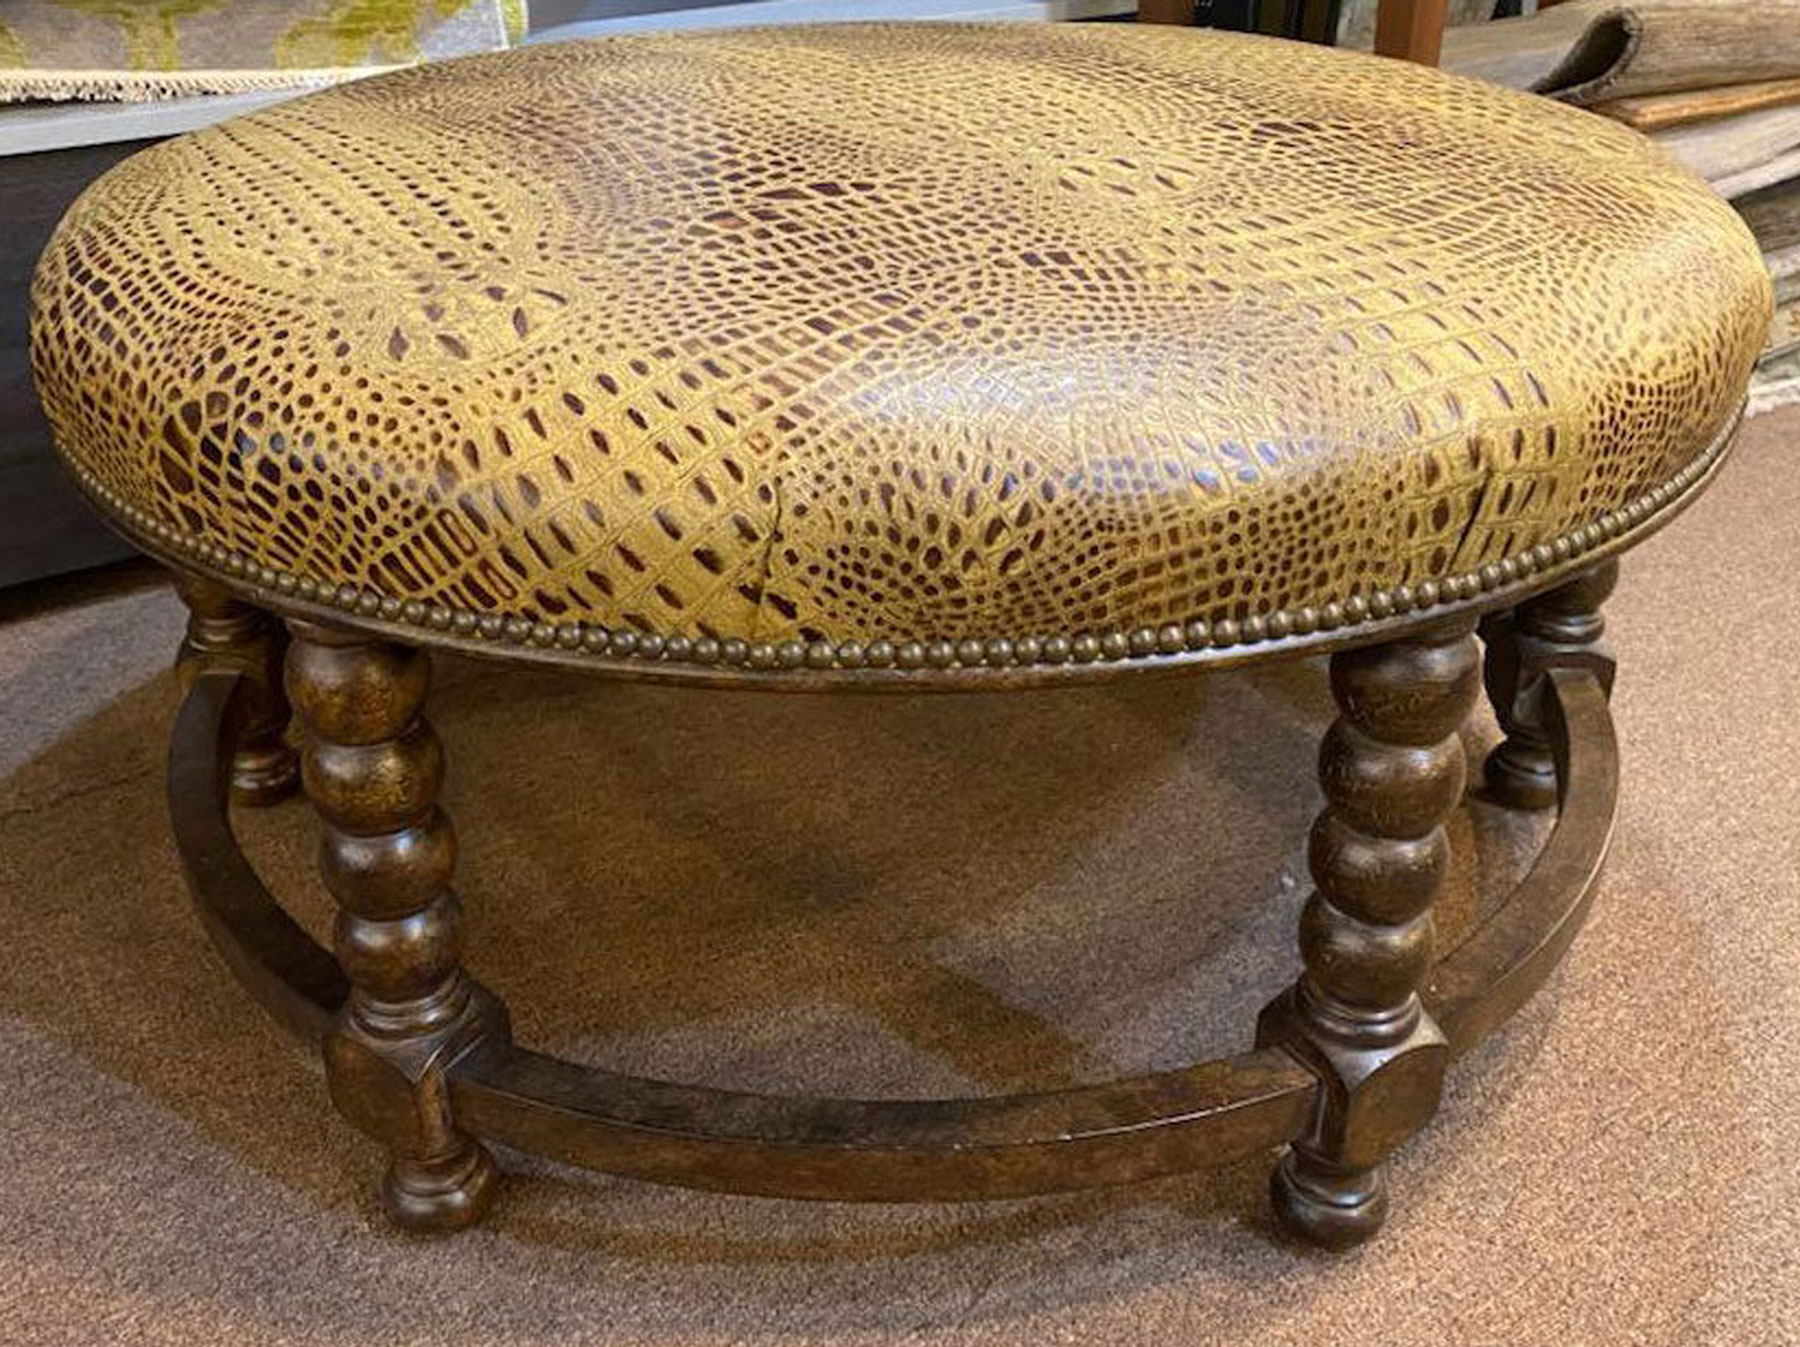 Our House 891-O Cardiff Round Wood Bench in Golden Croc Leather